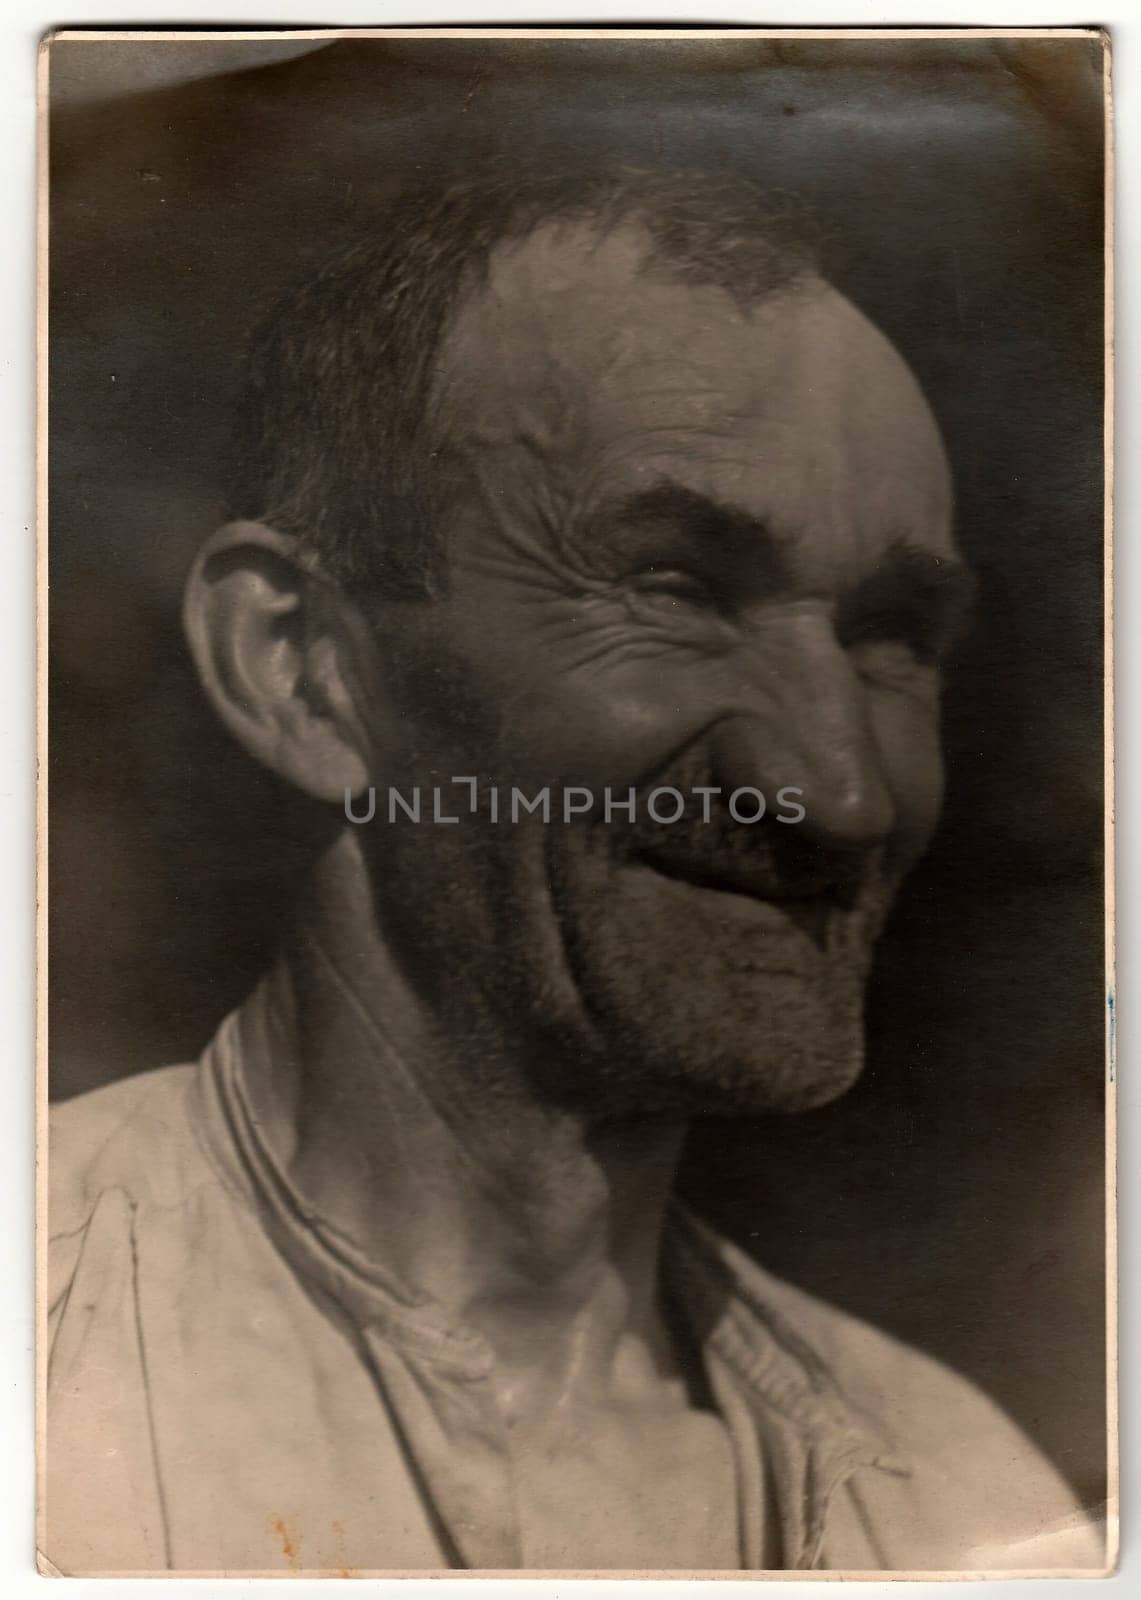 THE CZECHOSLOVAK REPUBLIC - CIRCA 1930s: A vintage photo shows old man with unshaven face.